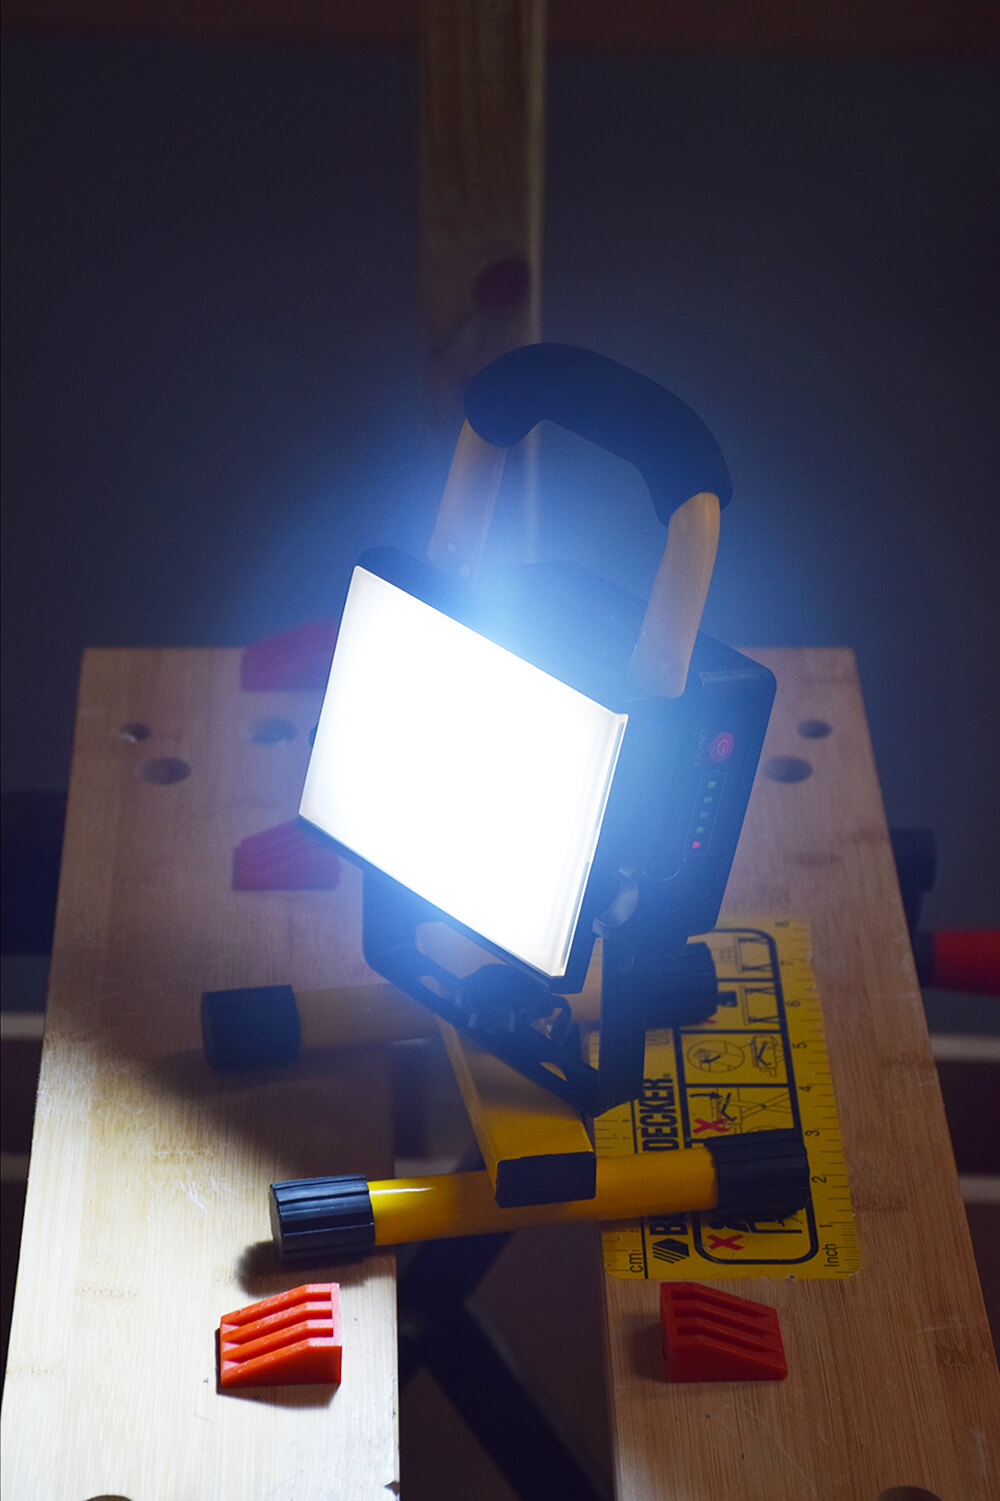 diall led rechargeable worklight expert tool review